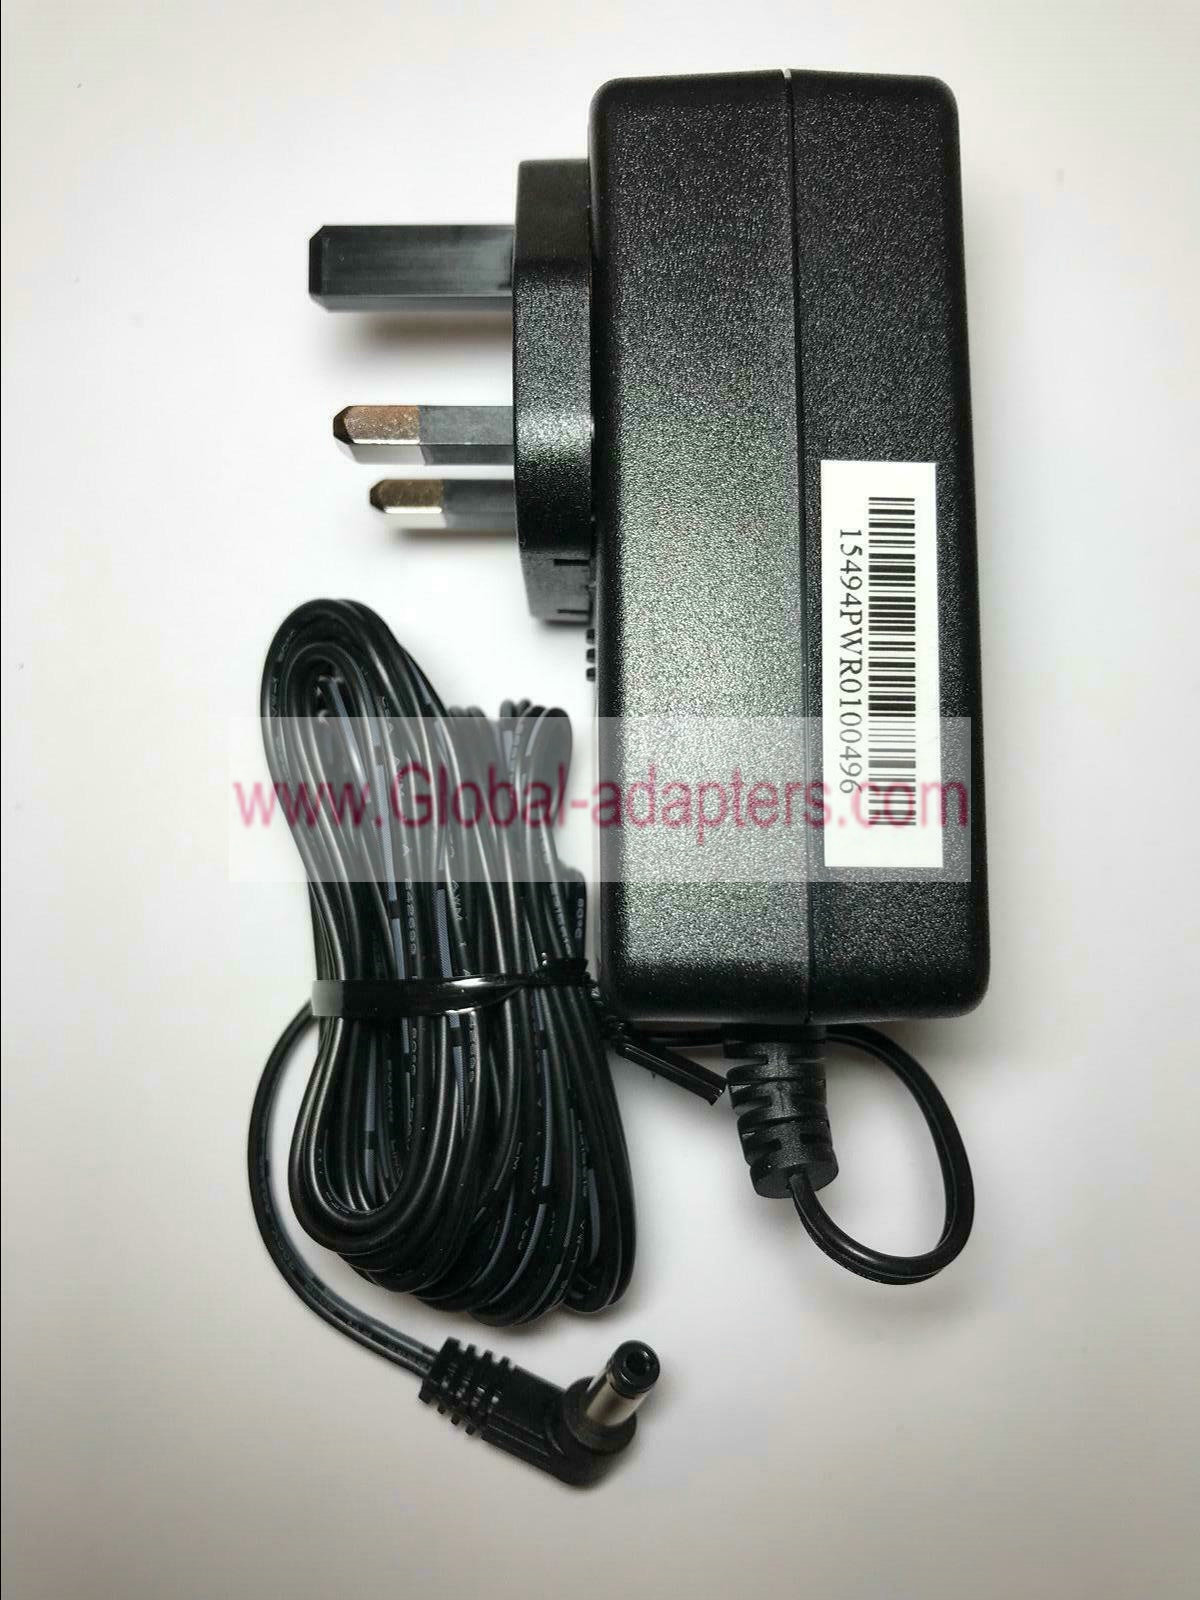 New 12V 2A SUNFONE 26298 PSU PART AC ADAPTOR POWER SUPPLY CHARGER